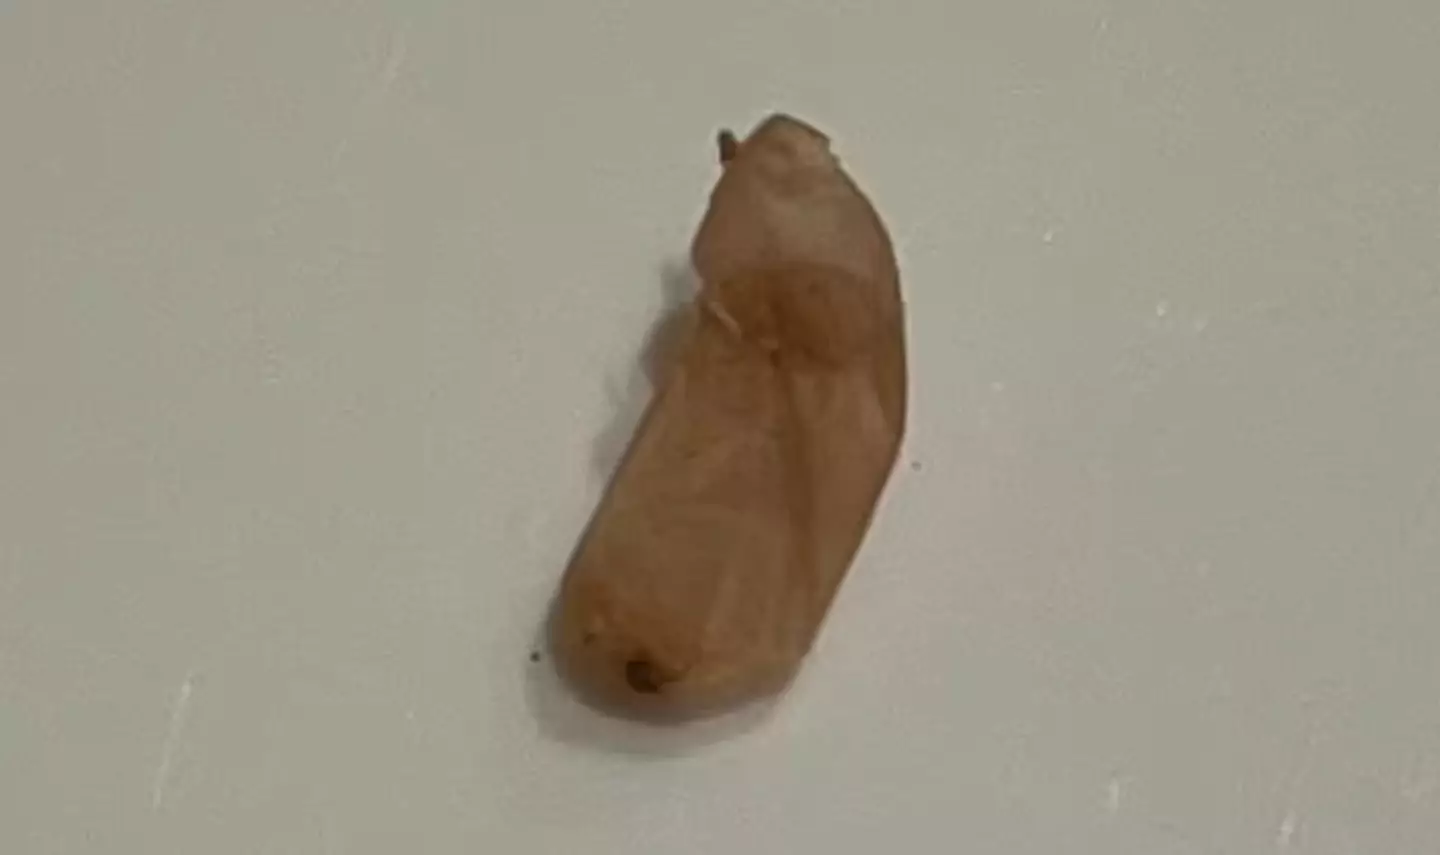 The woman was baffled after finding the bean-shaped objects in her bathroom.